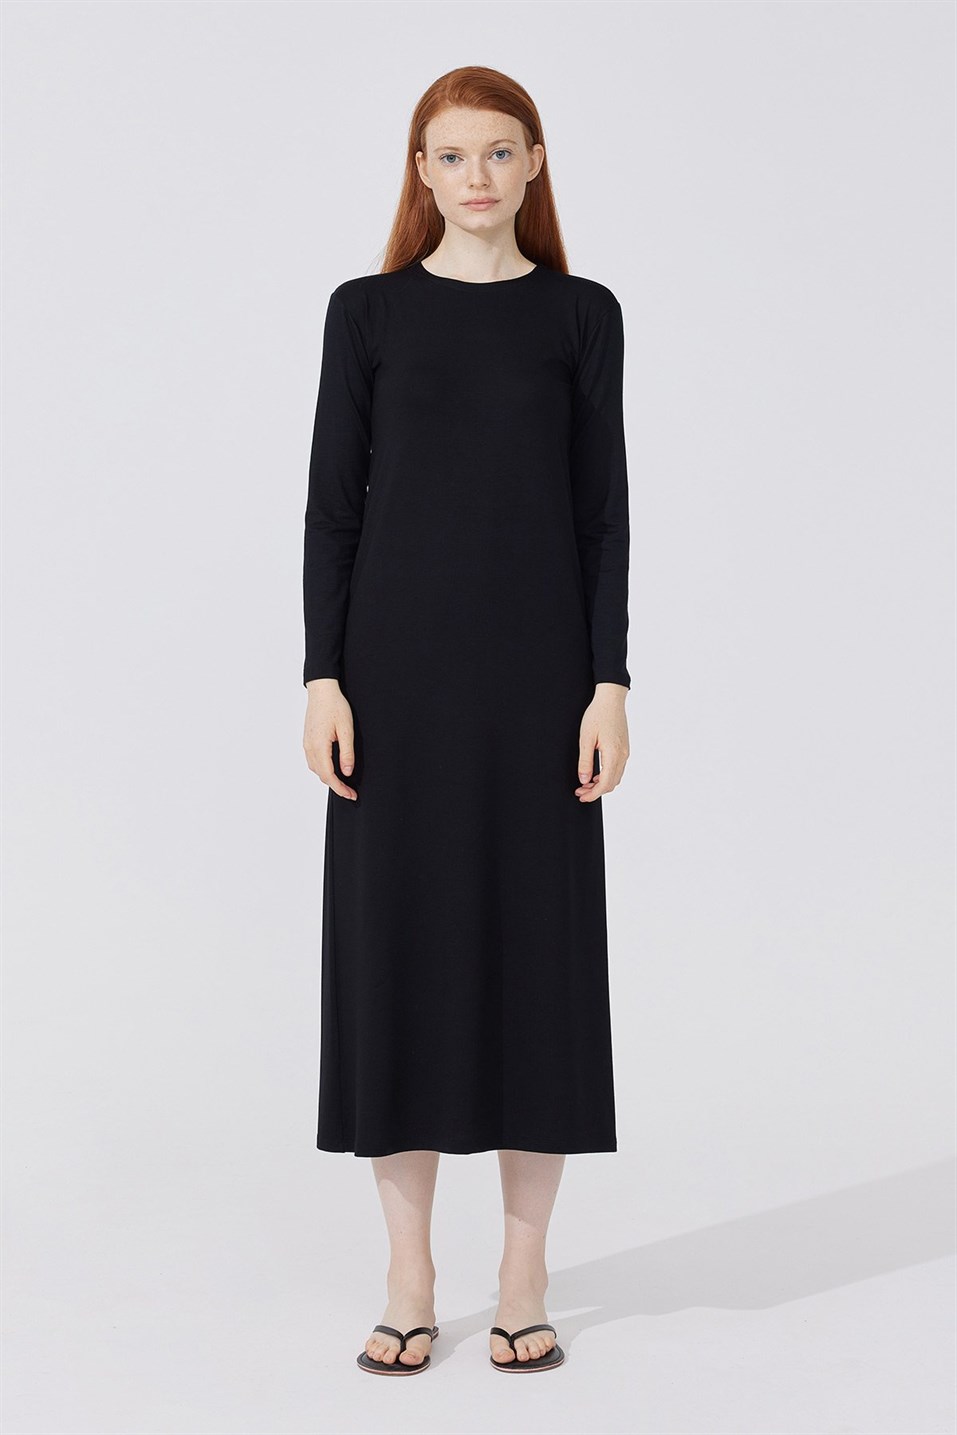 Black Long Sleeve Lined Combed Cotton Dress